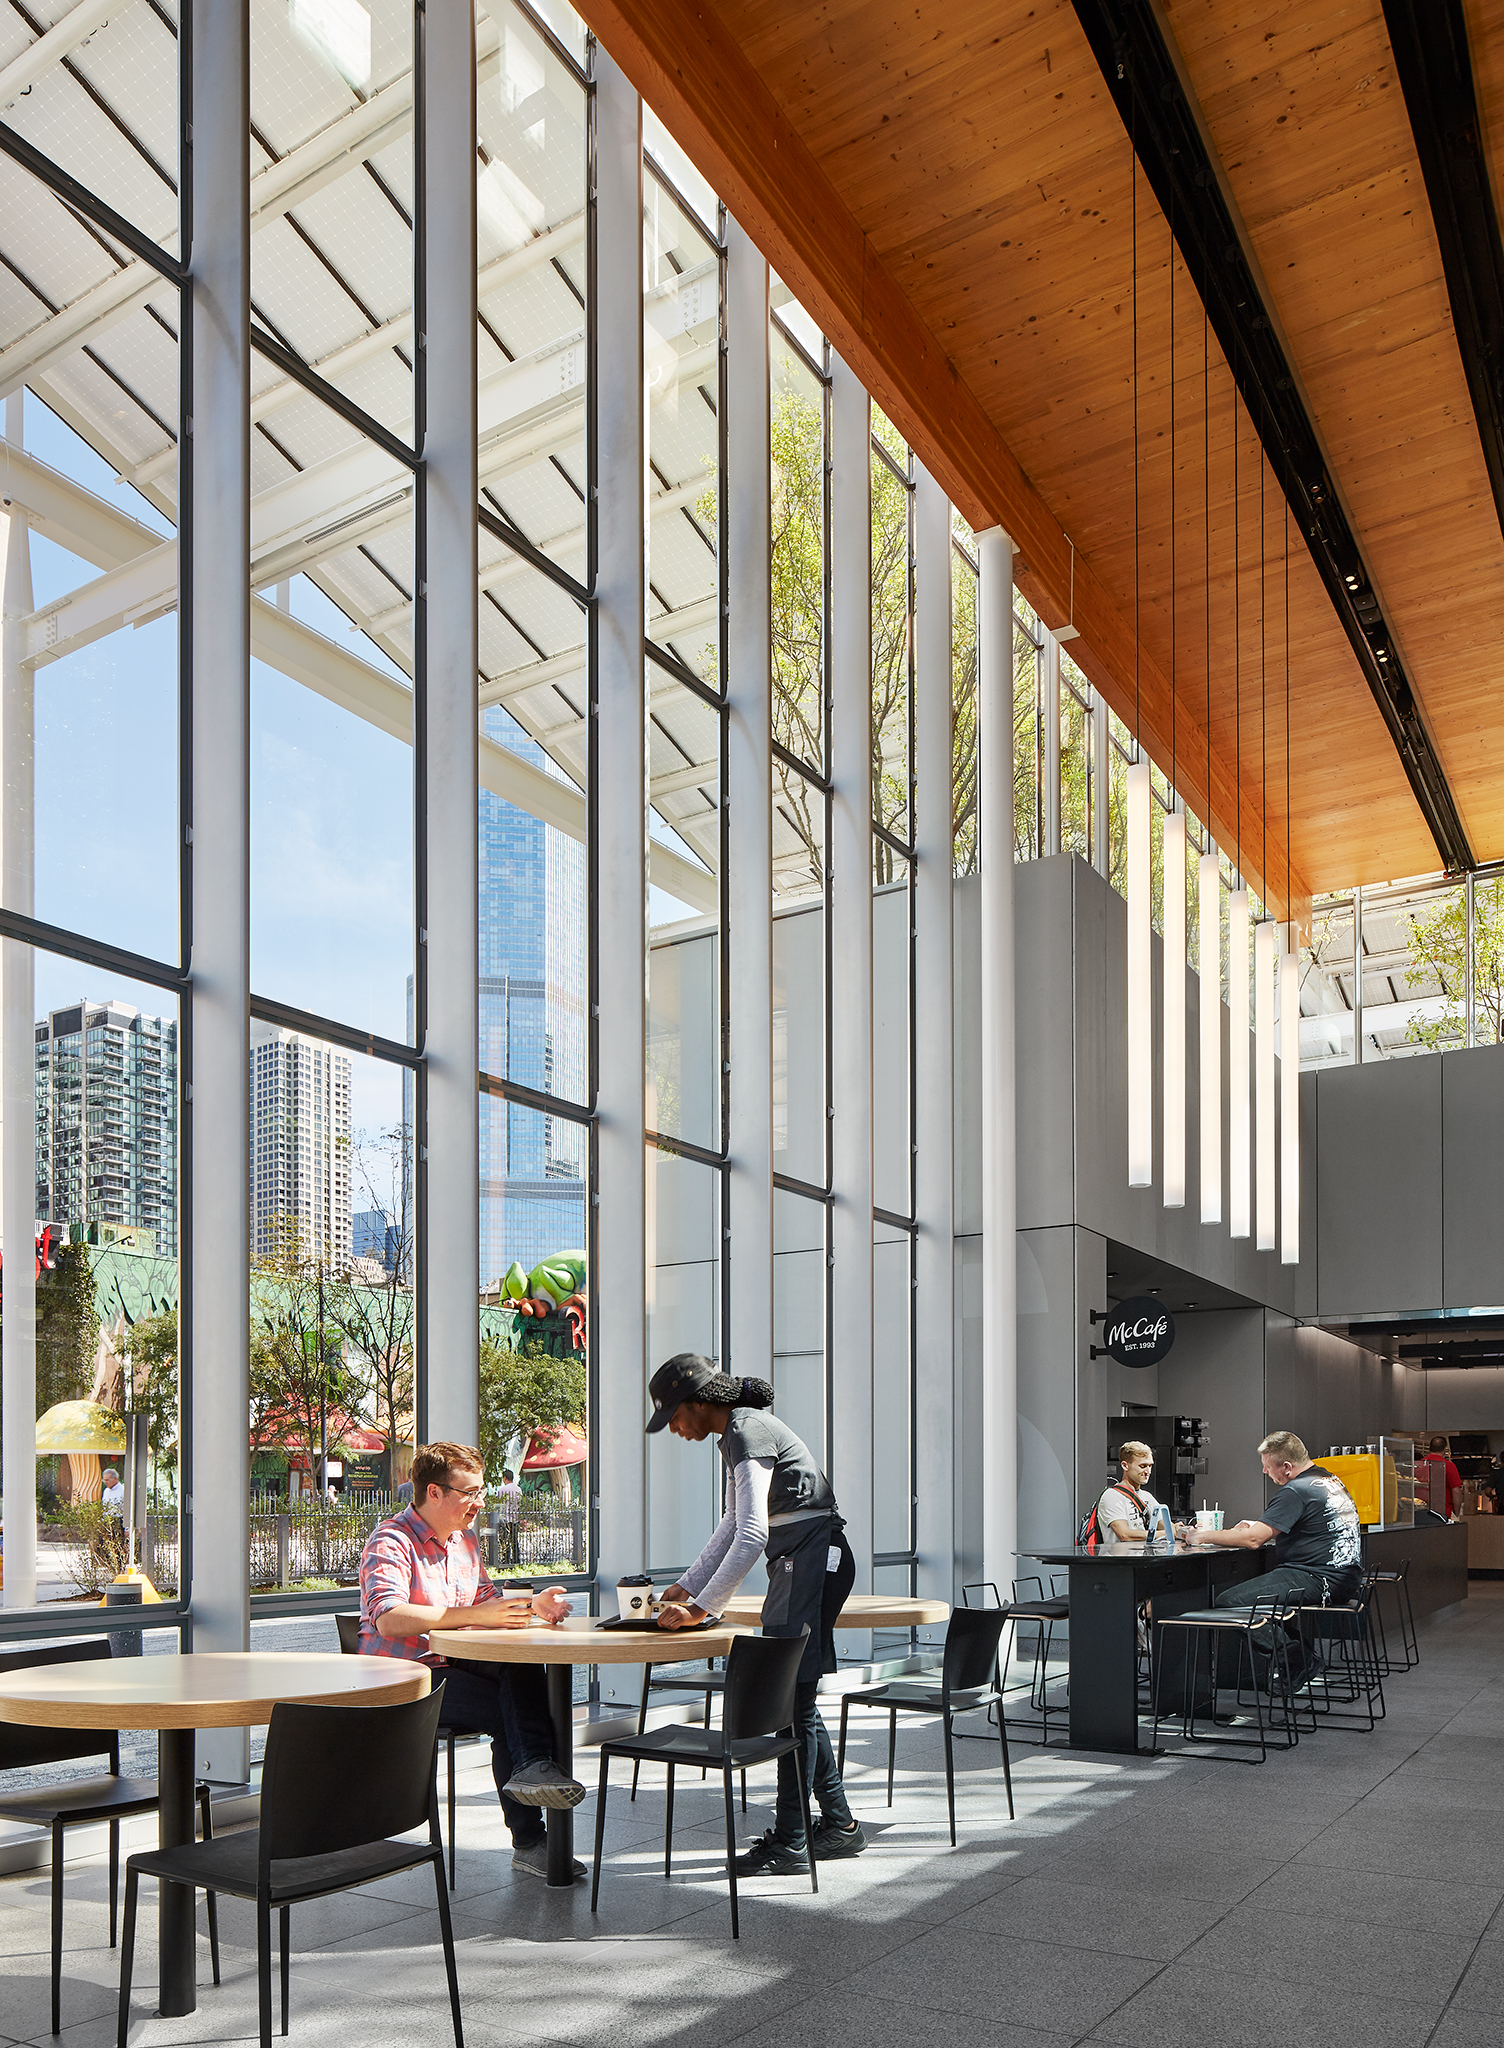  AWARDS    AIA Chicago Design Excellence Awards  2019  - Citation of Merit - Distinguished Building Award    McDonald’s Chicago Flagship  Ross Barney Architects  Chicago, IL     Return to Projects  